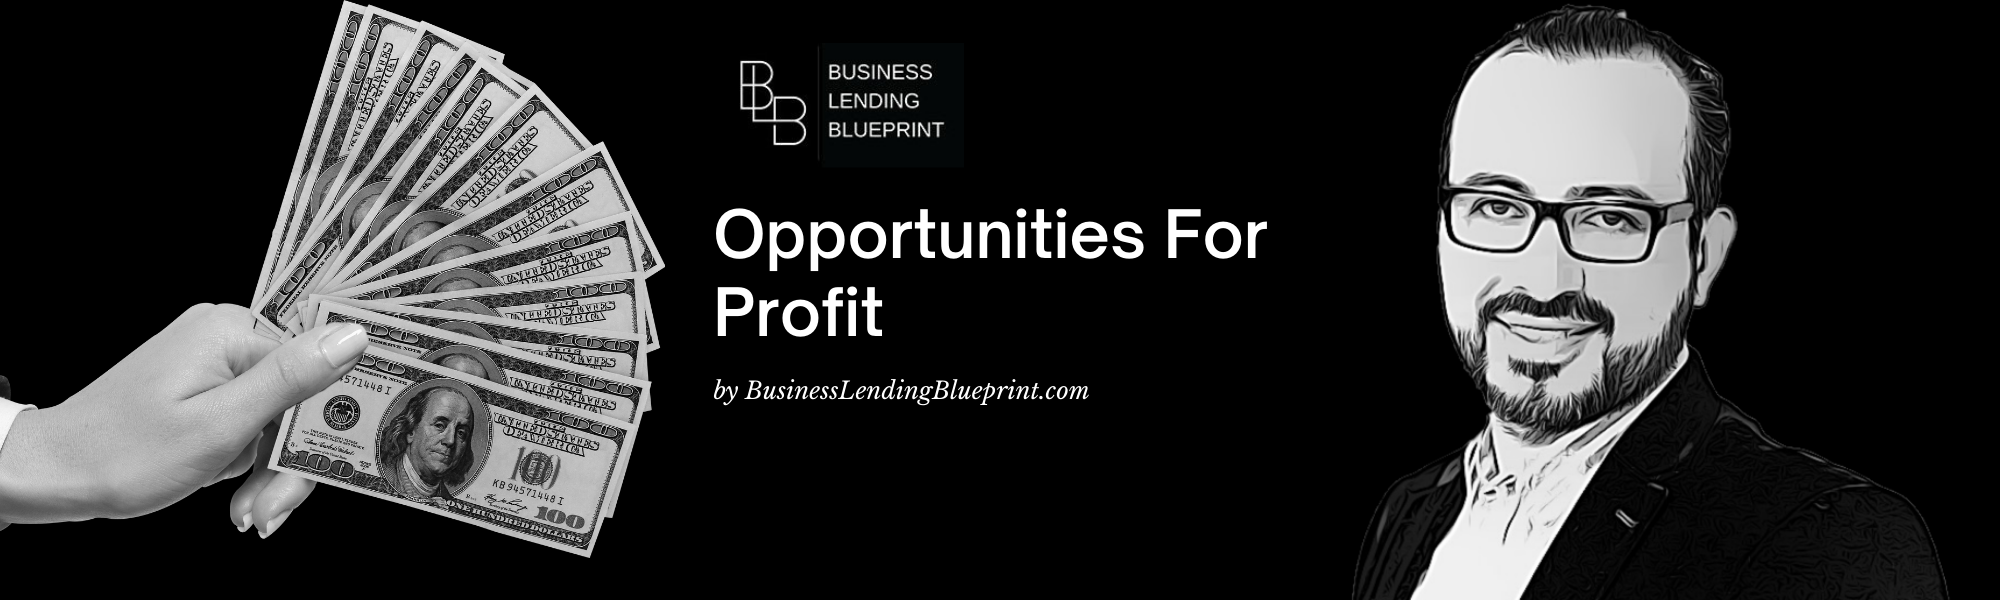 Opportunities For Profit graphic